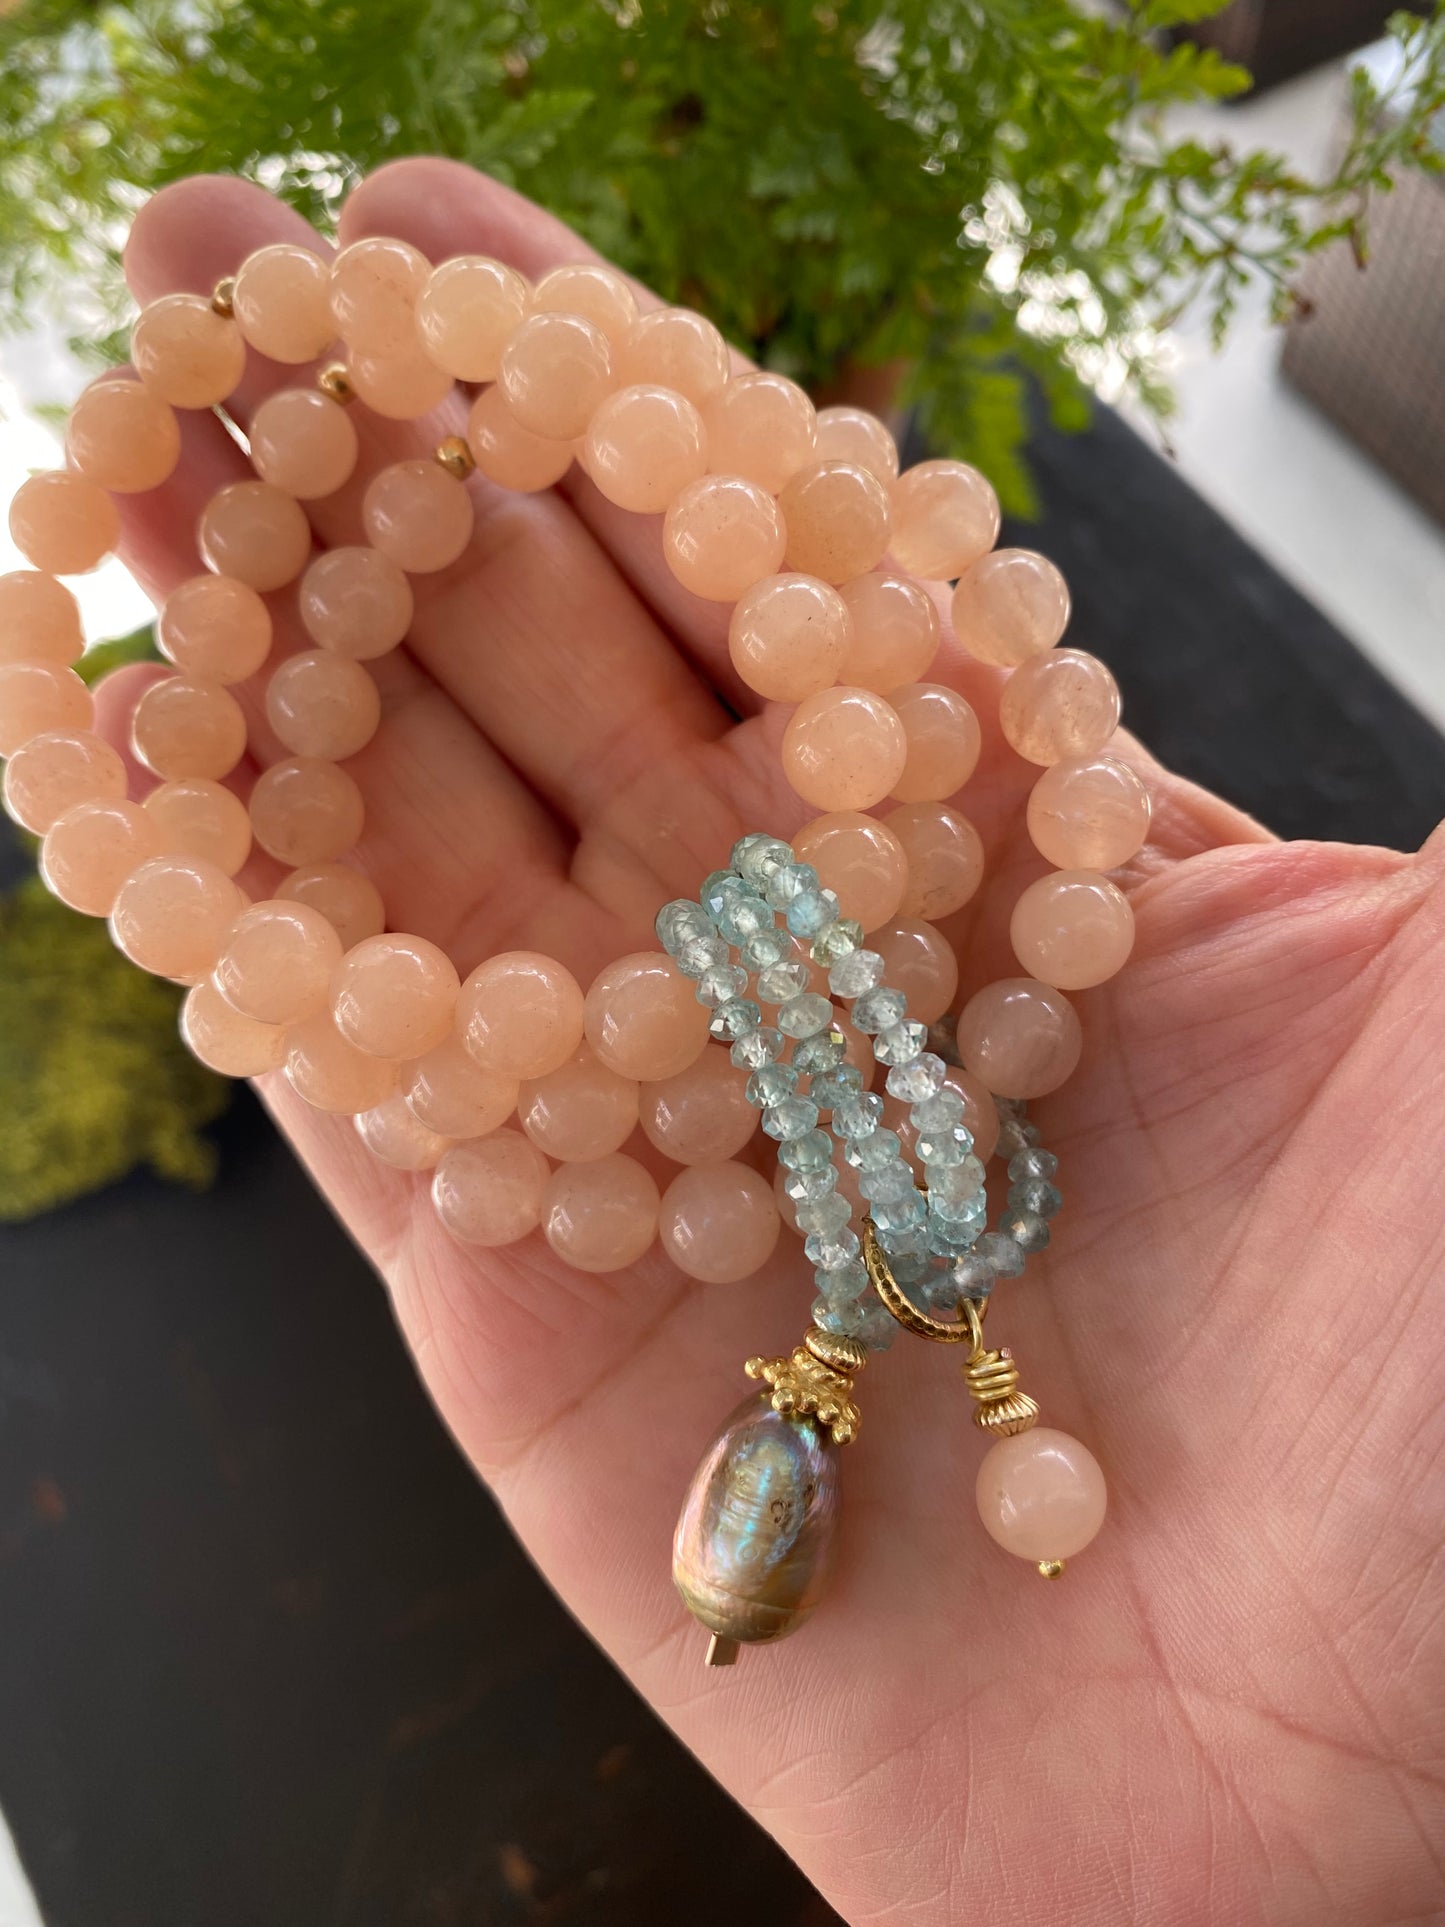 Wrapture Signature Collection Peach Chalcedony and Apatite Bracelet